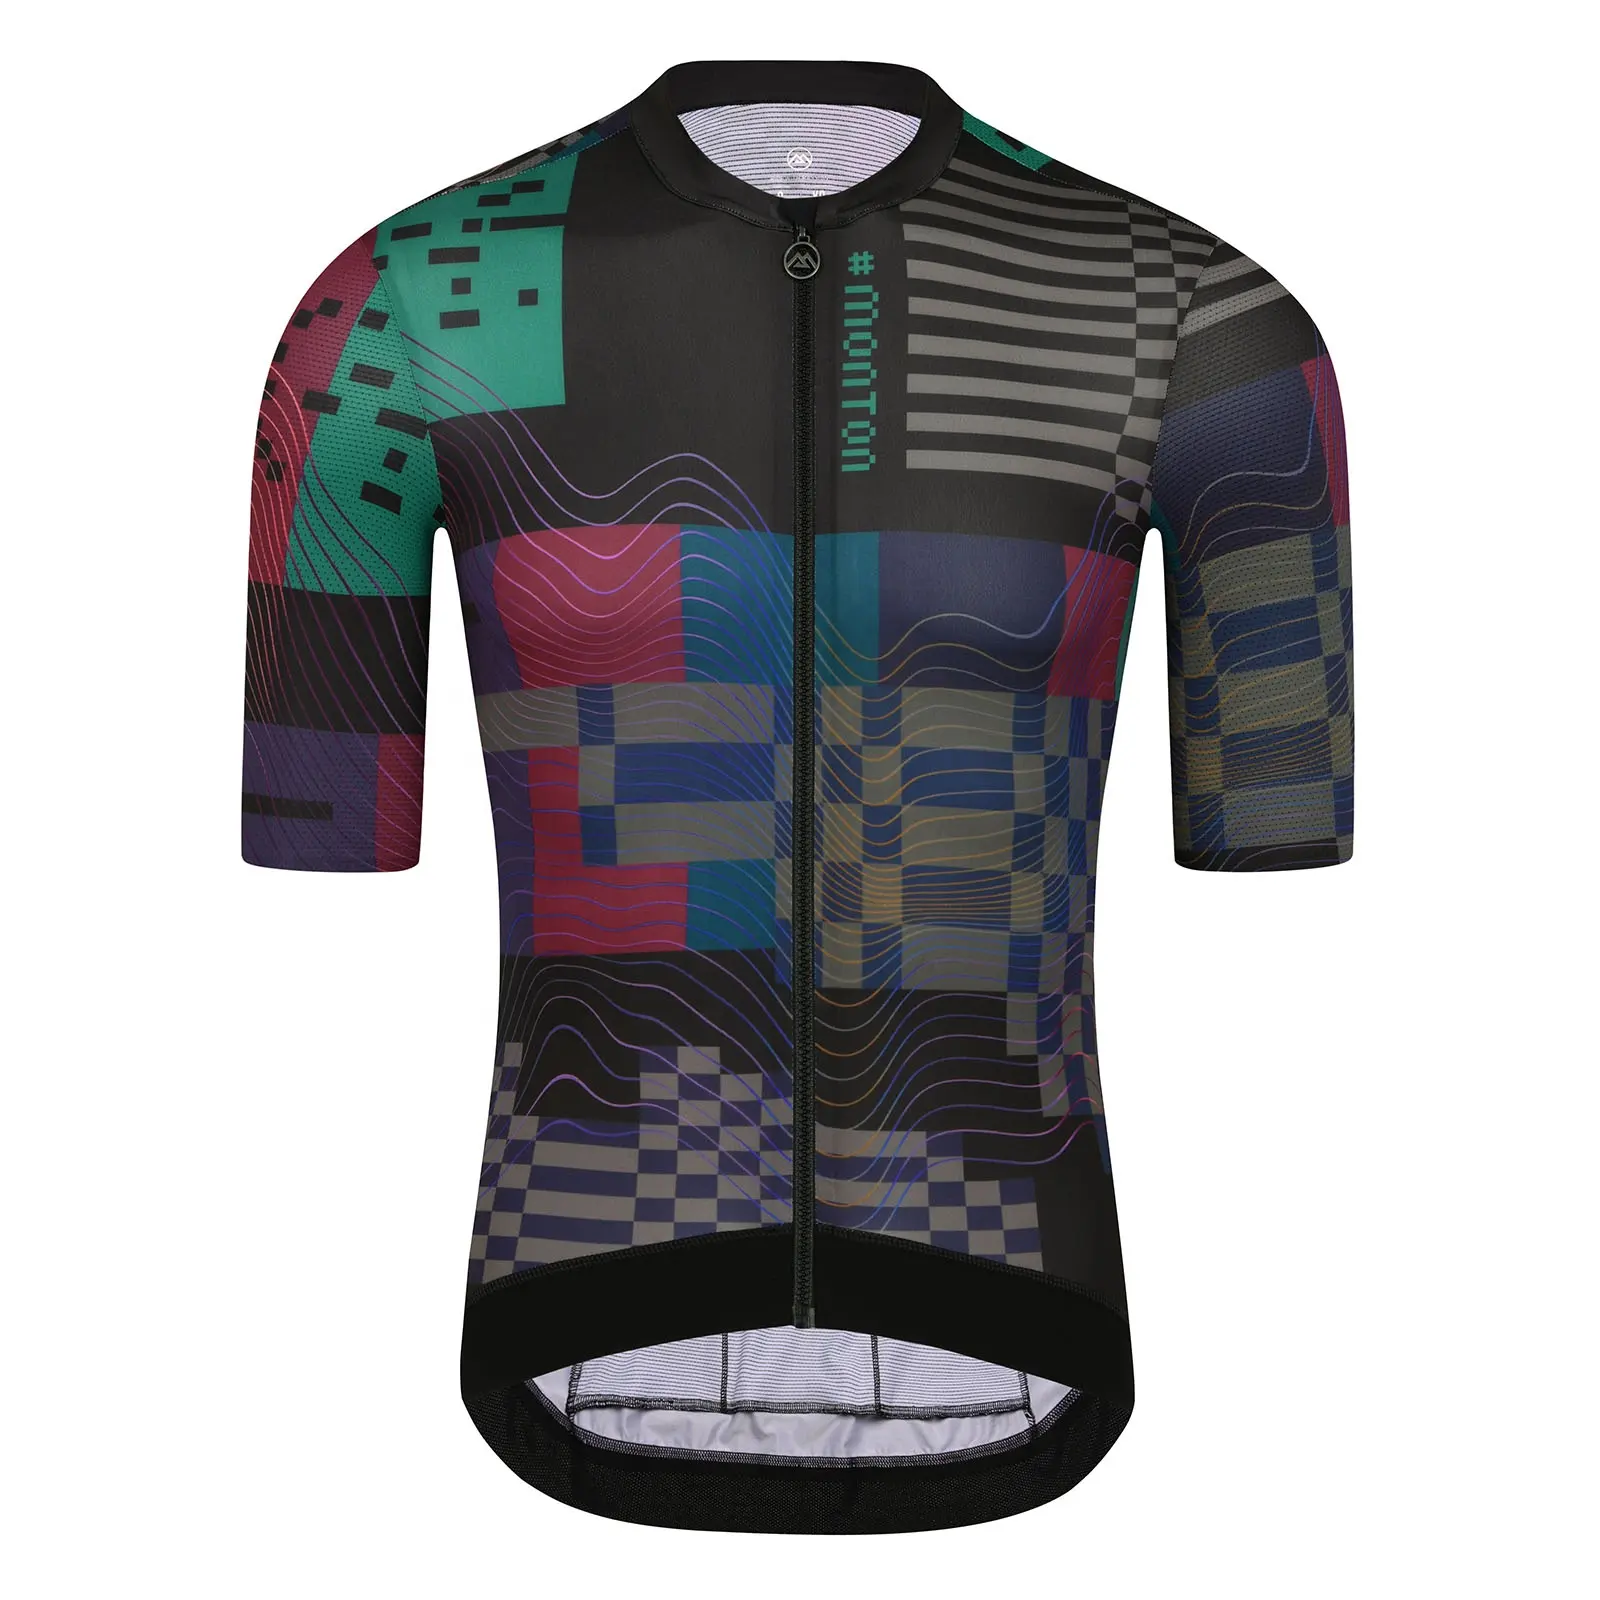 Monton UV Protection Cycling Clothes Plus Size Men's Shirts Cycling Wear Bike Clothing